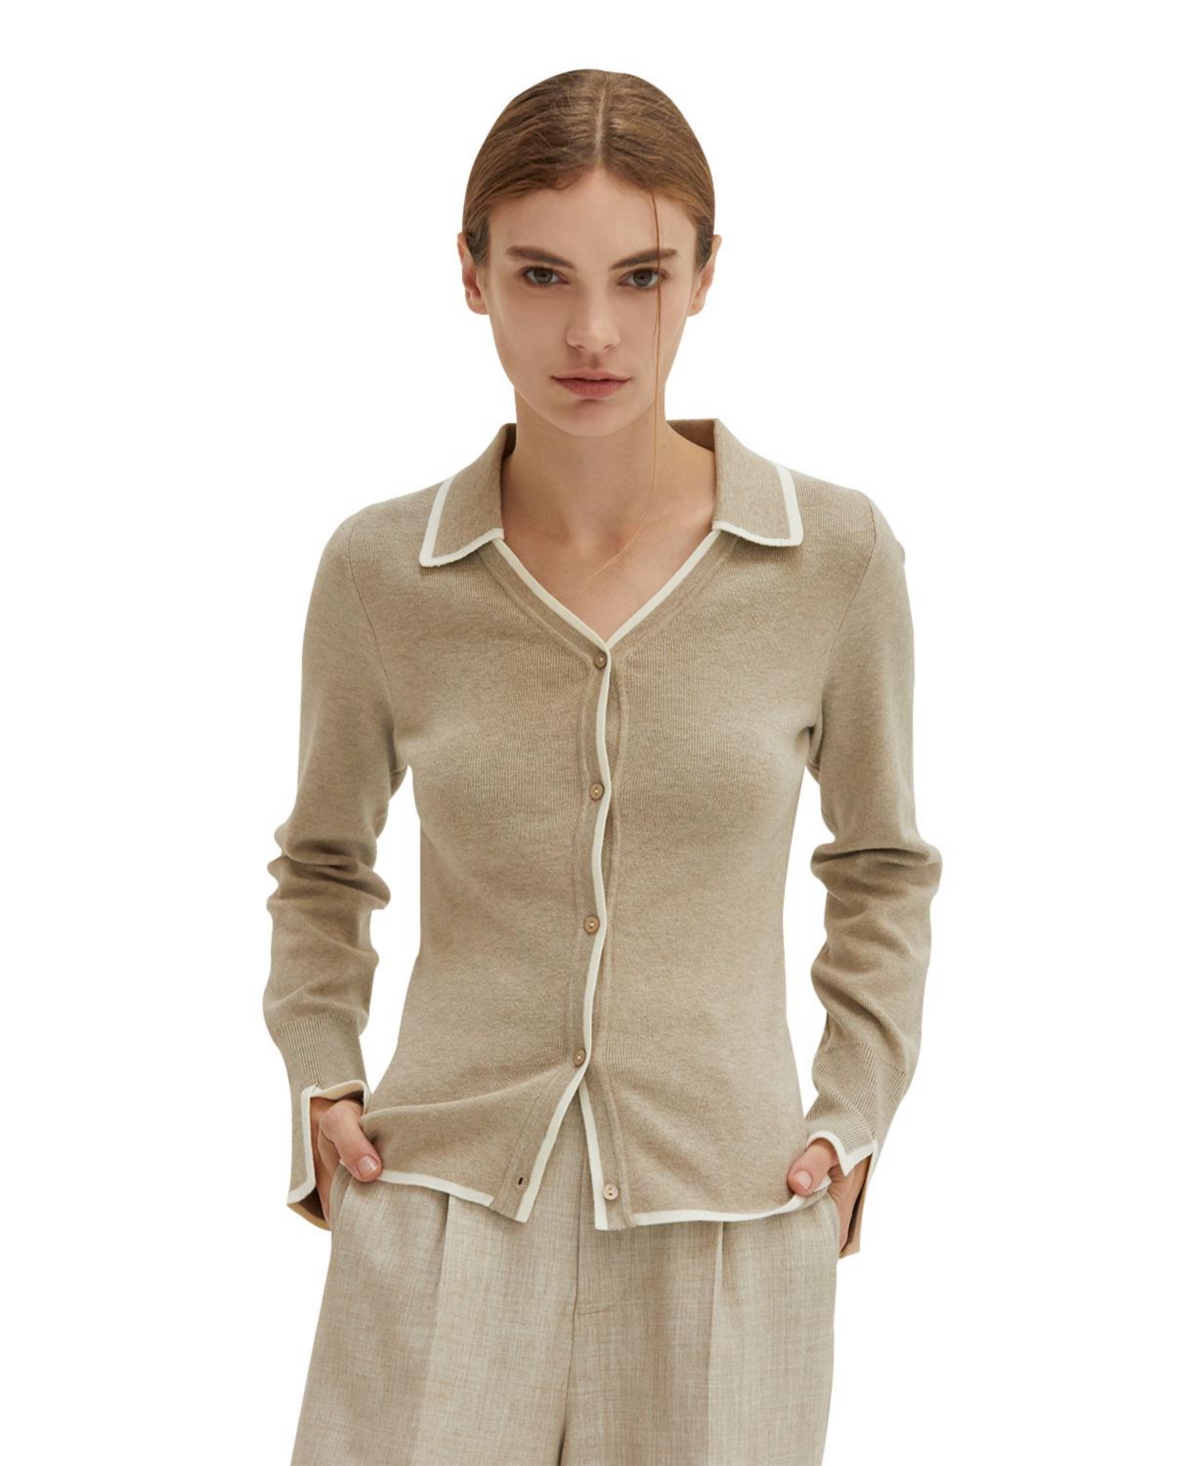 Women's Dalia Sweater Knit Top with Contrast Pop - Natural + oatmeal